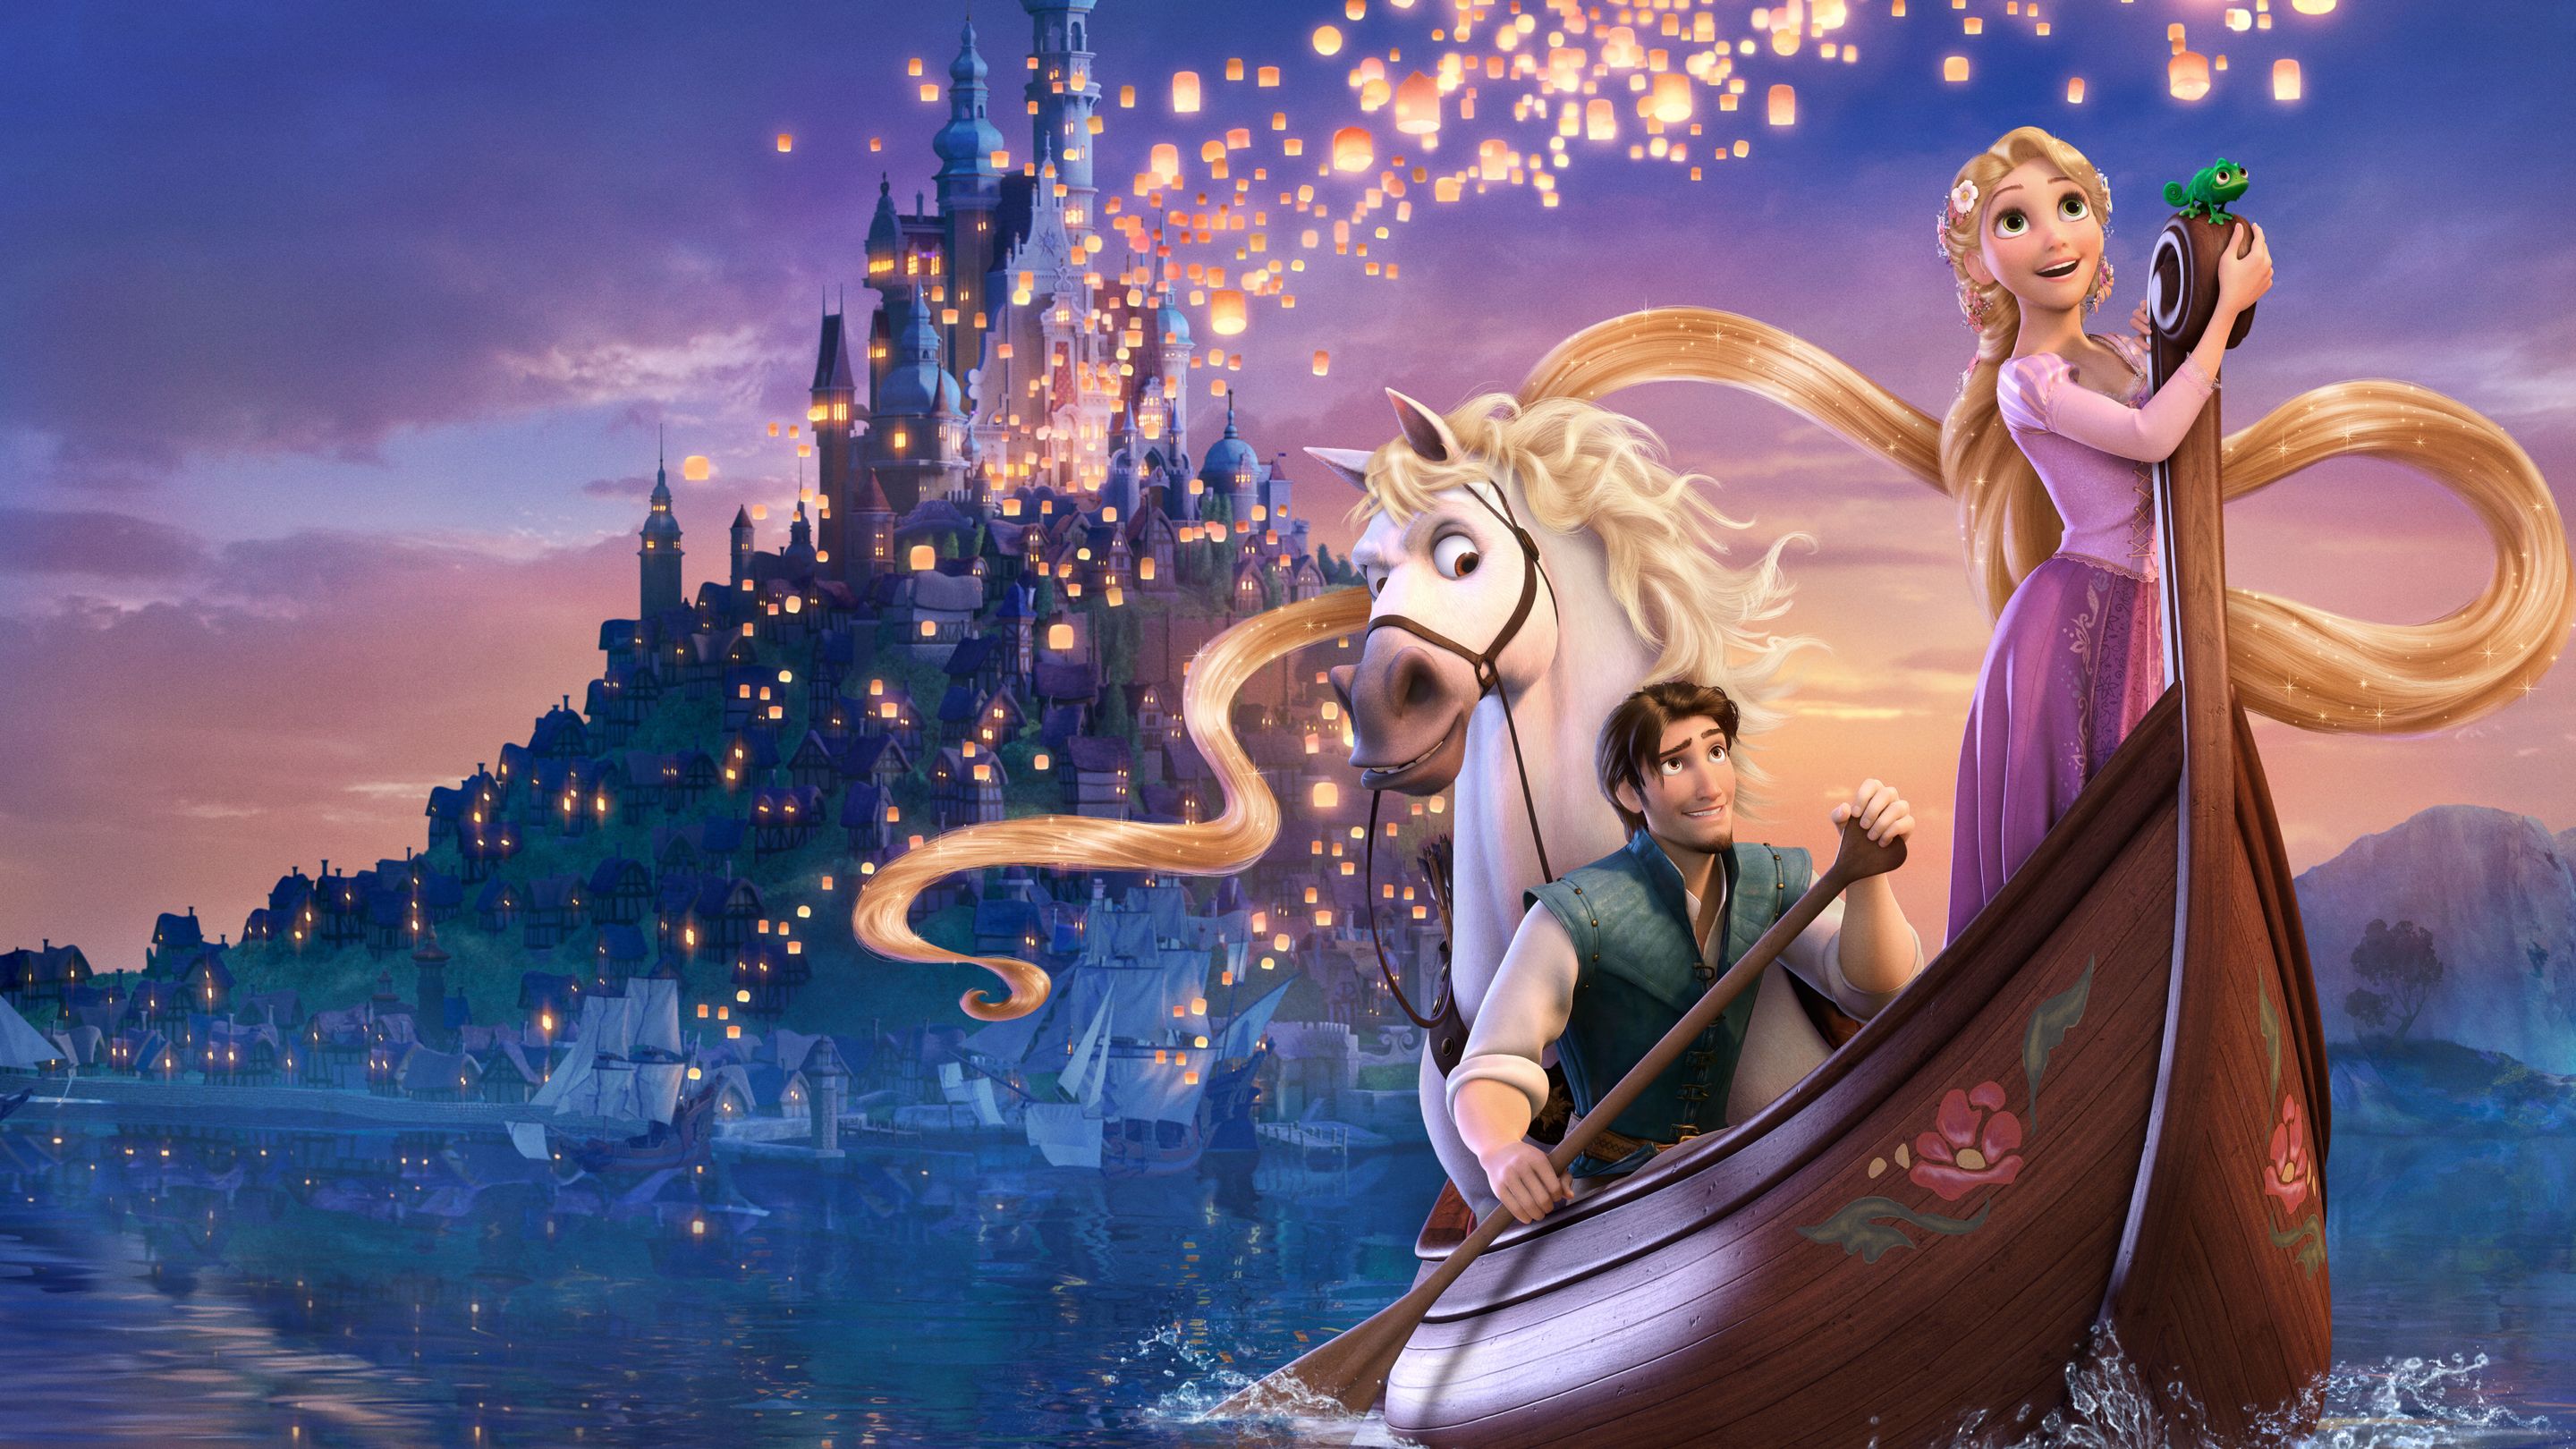 tangled full movie online with english subtitles